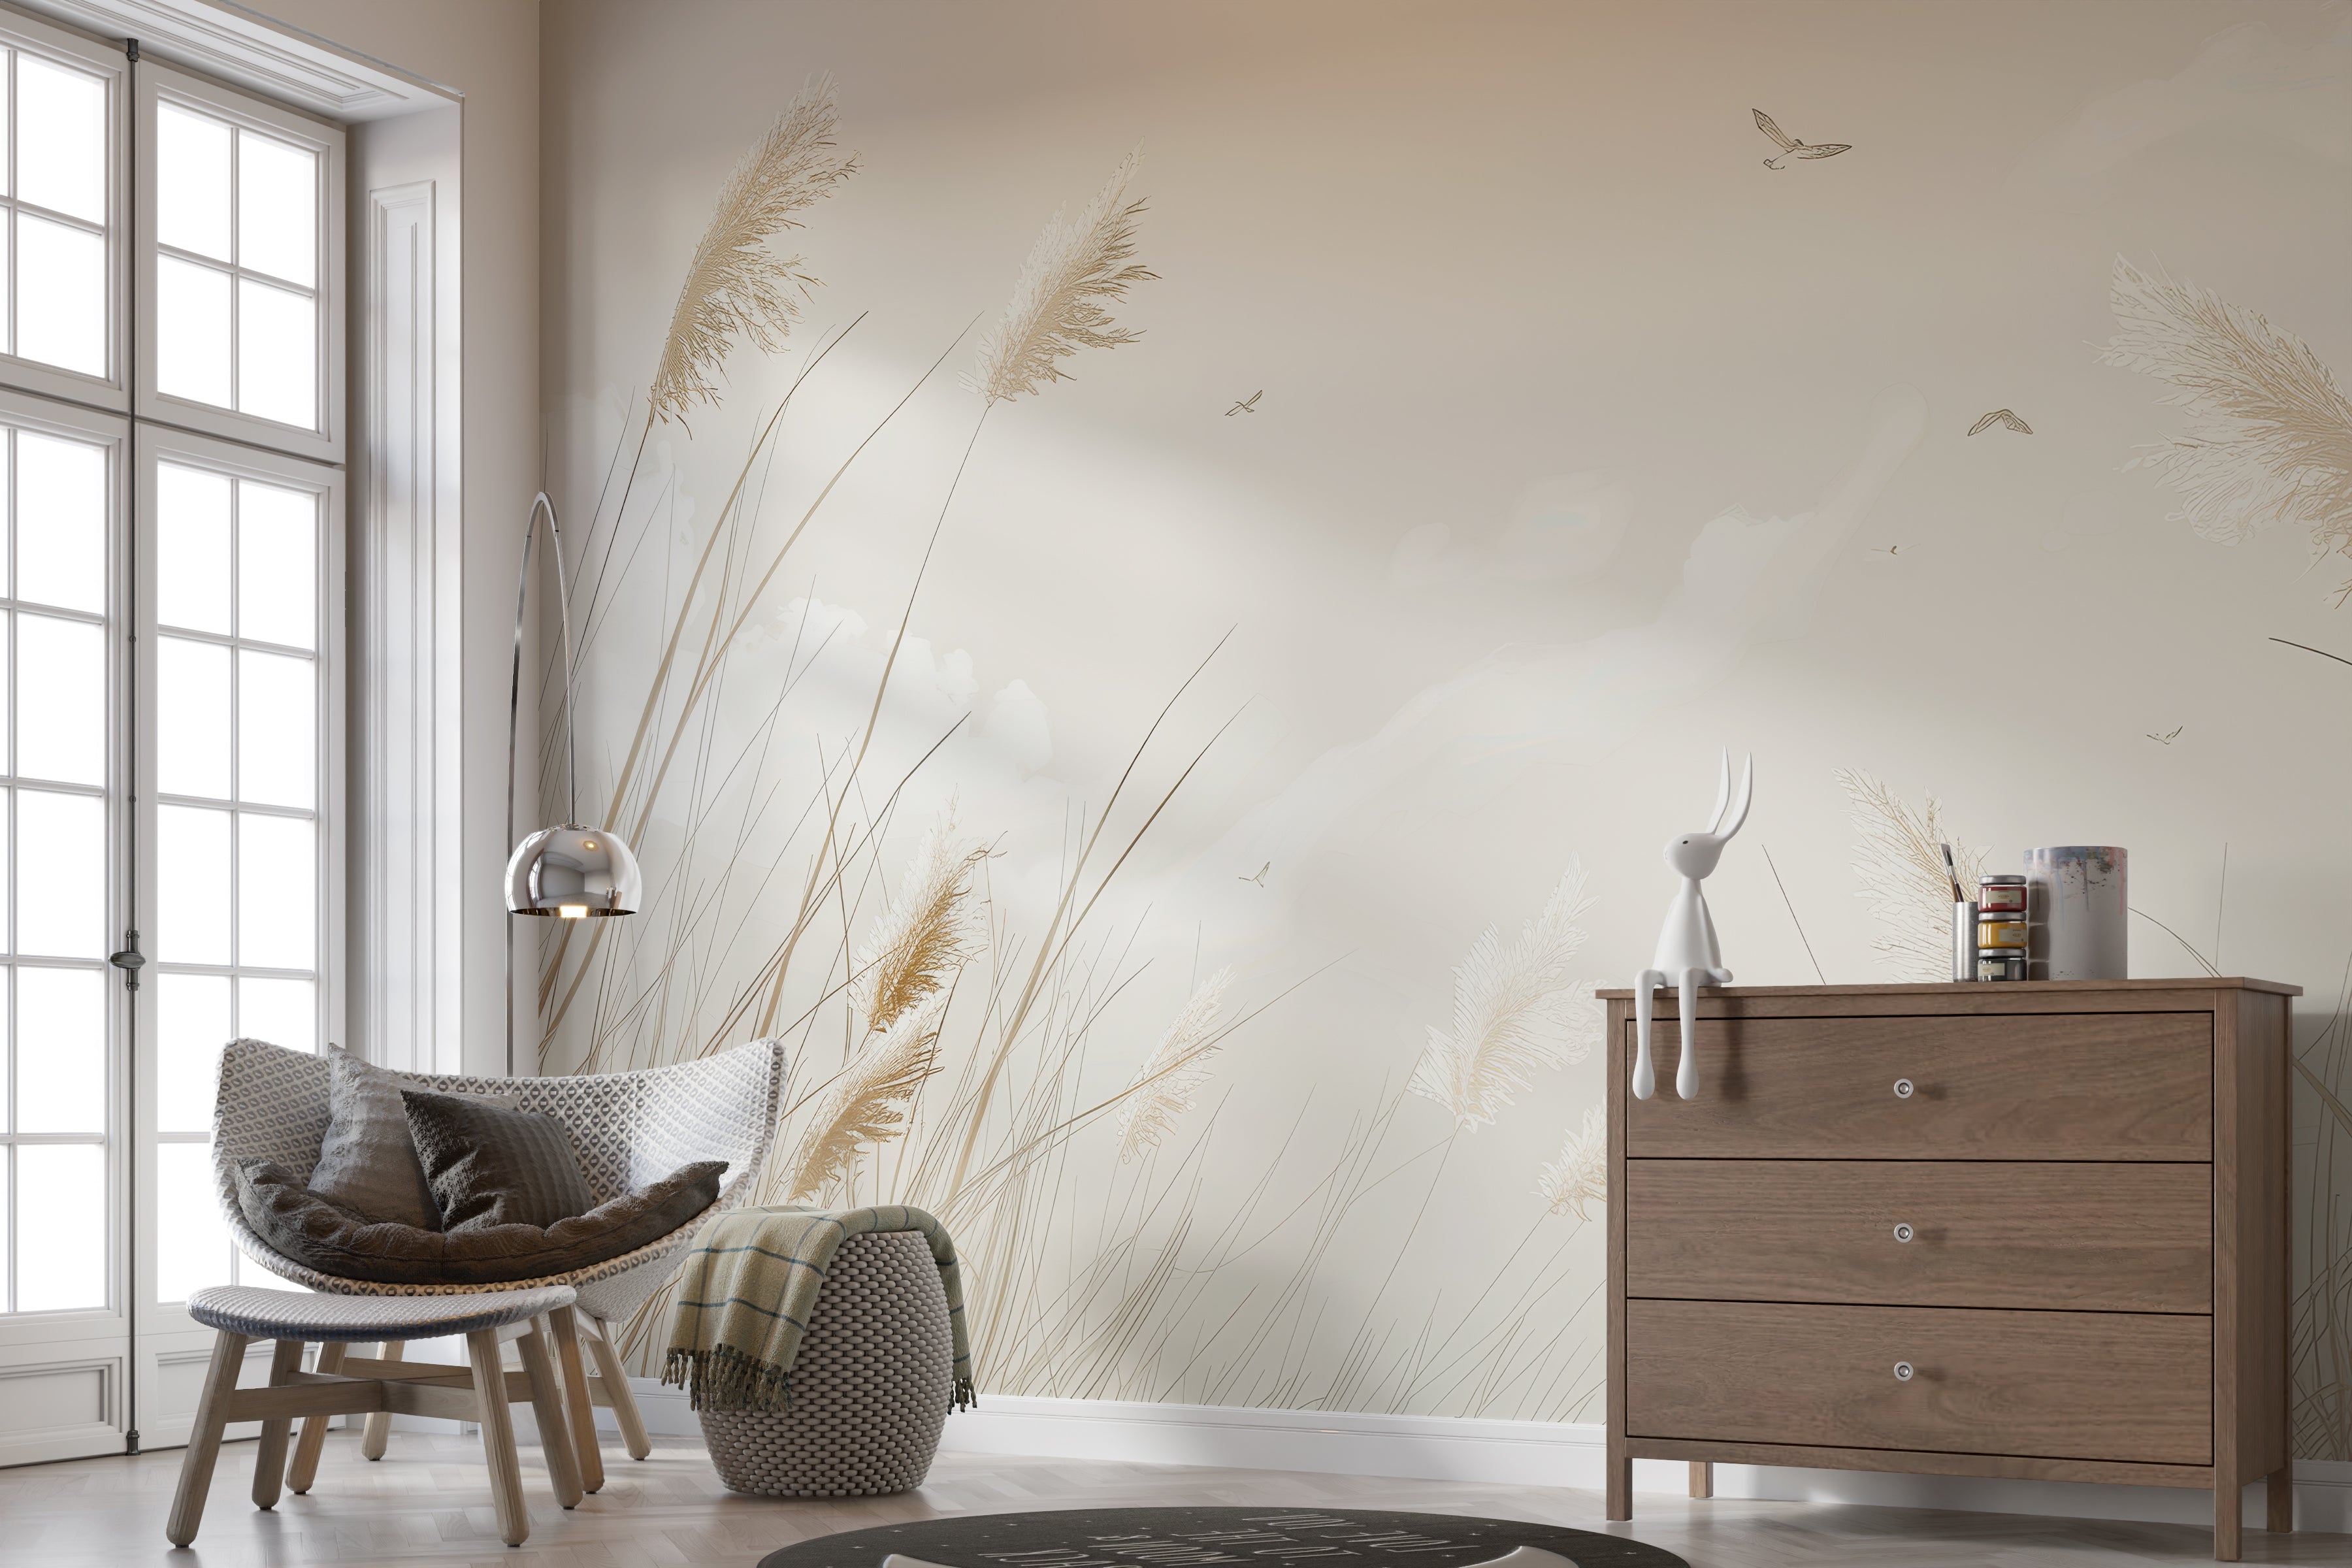 Natural Serenity: Wall Decoration with Wild Herbs